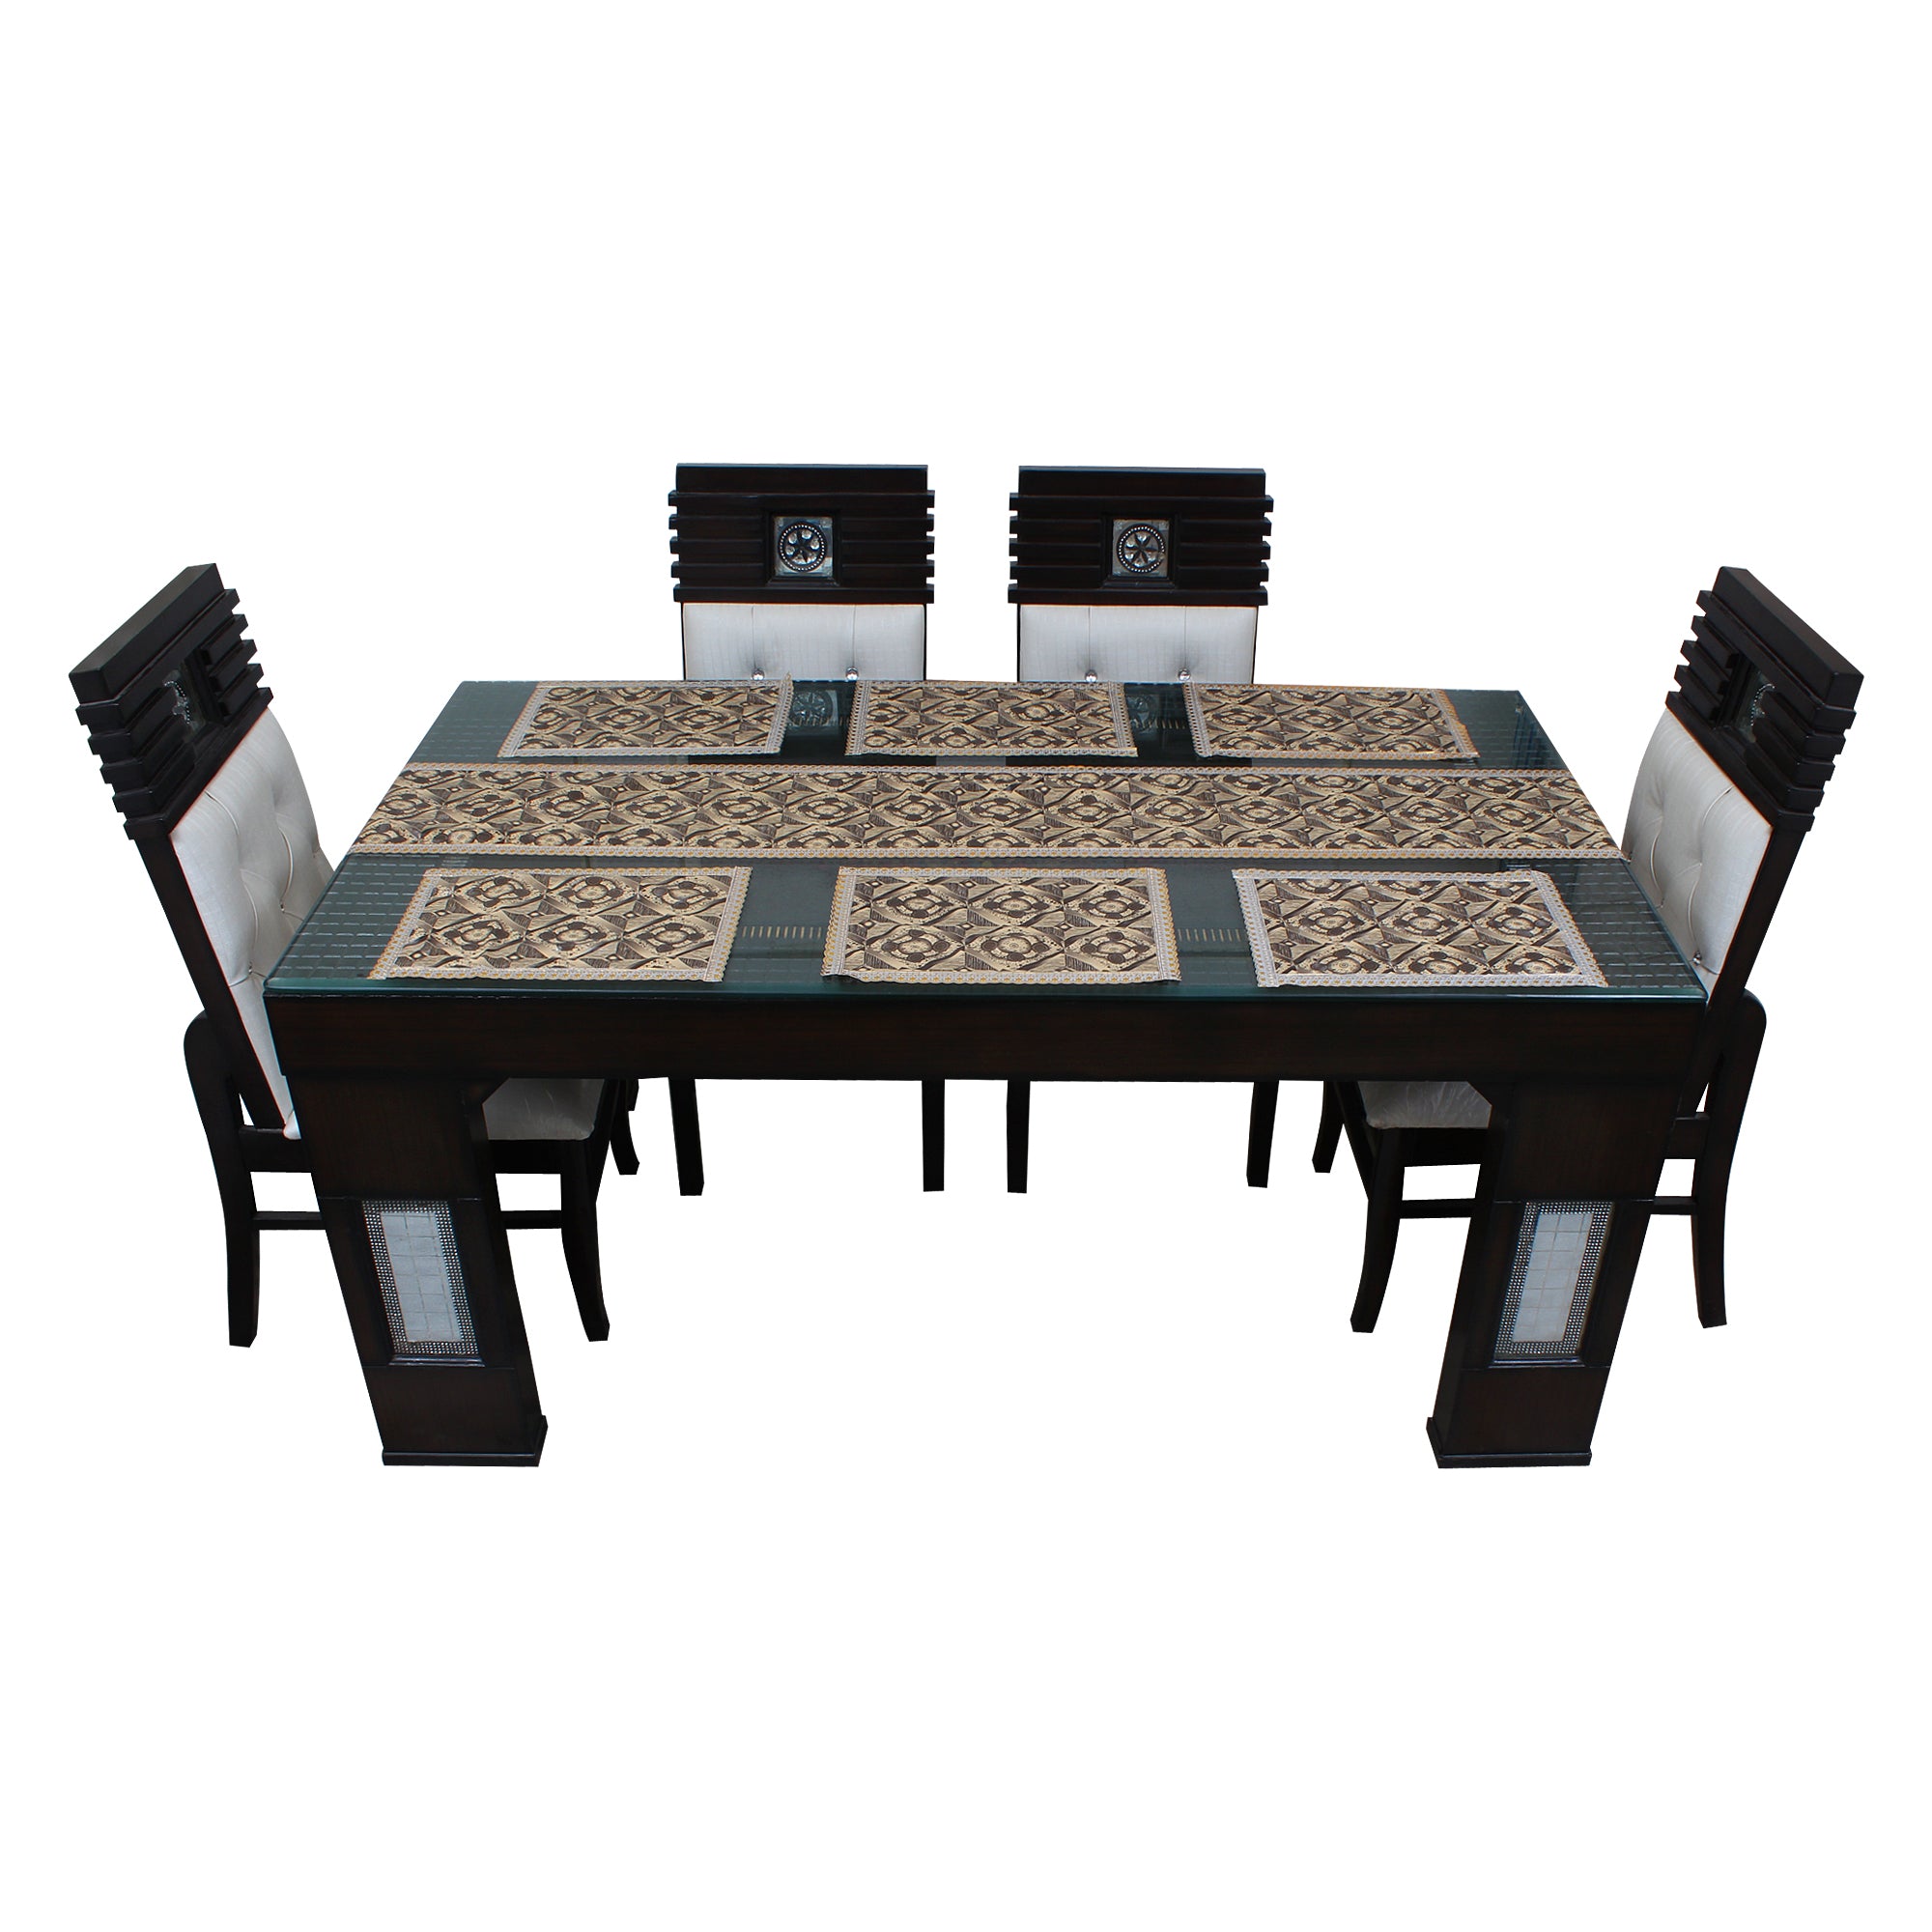 Waterproof & Dustproof Dining Table Runner With 6 Placemats, SA56 - Dream Care Furnishings Private Limited